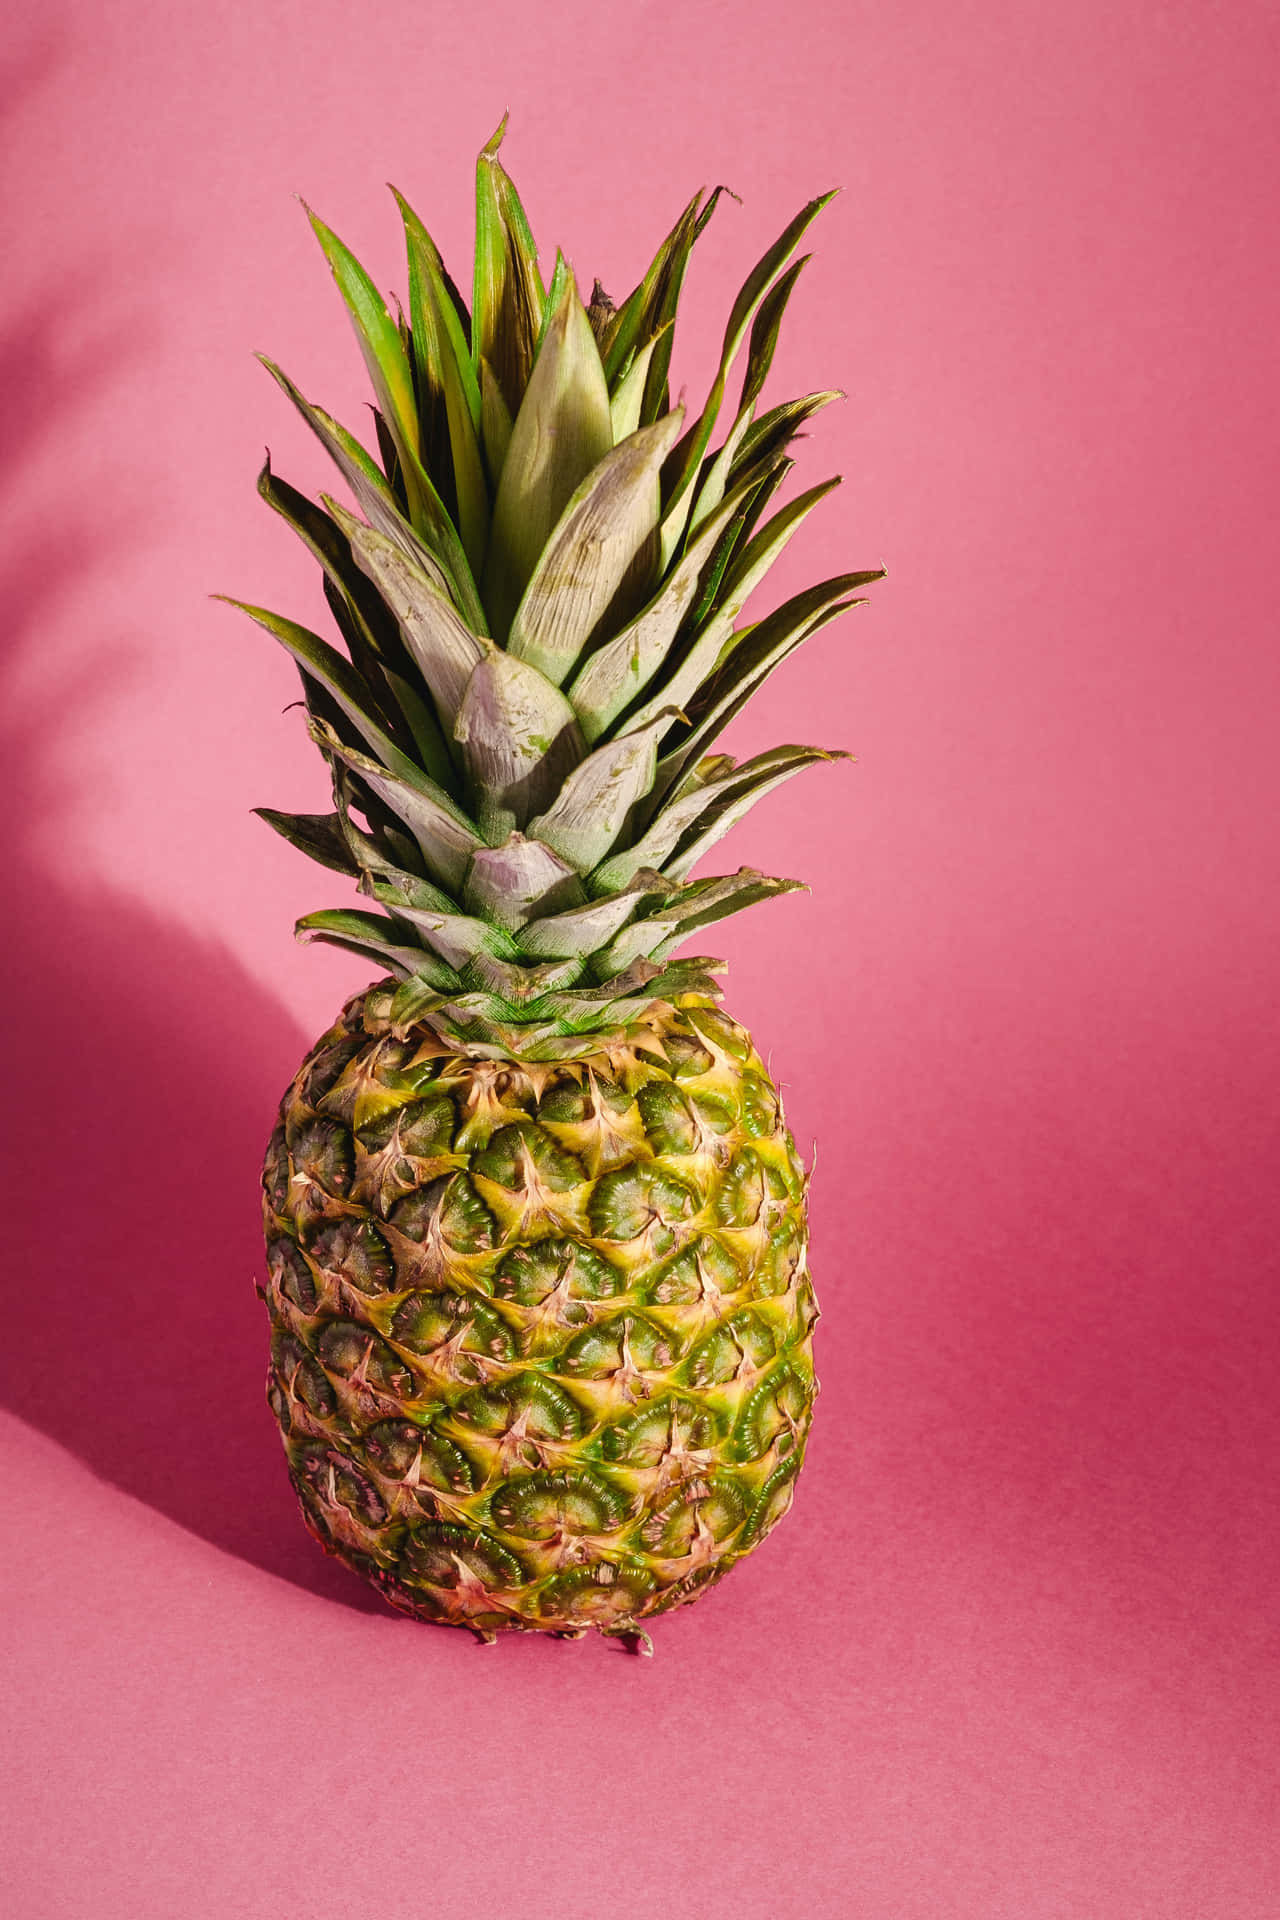 Refresh your day with a pineapple!